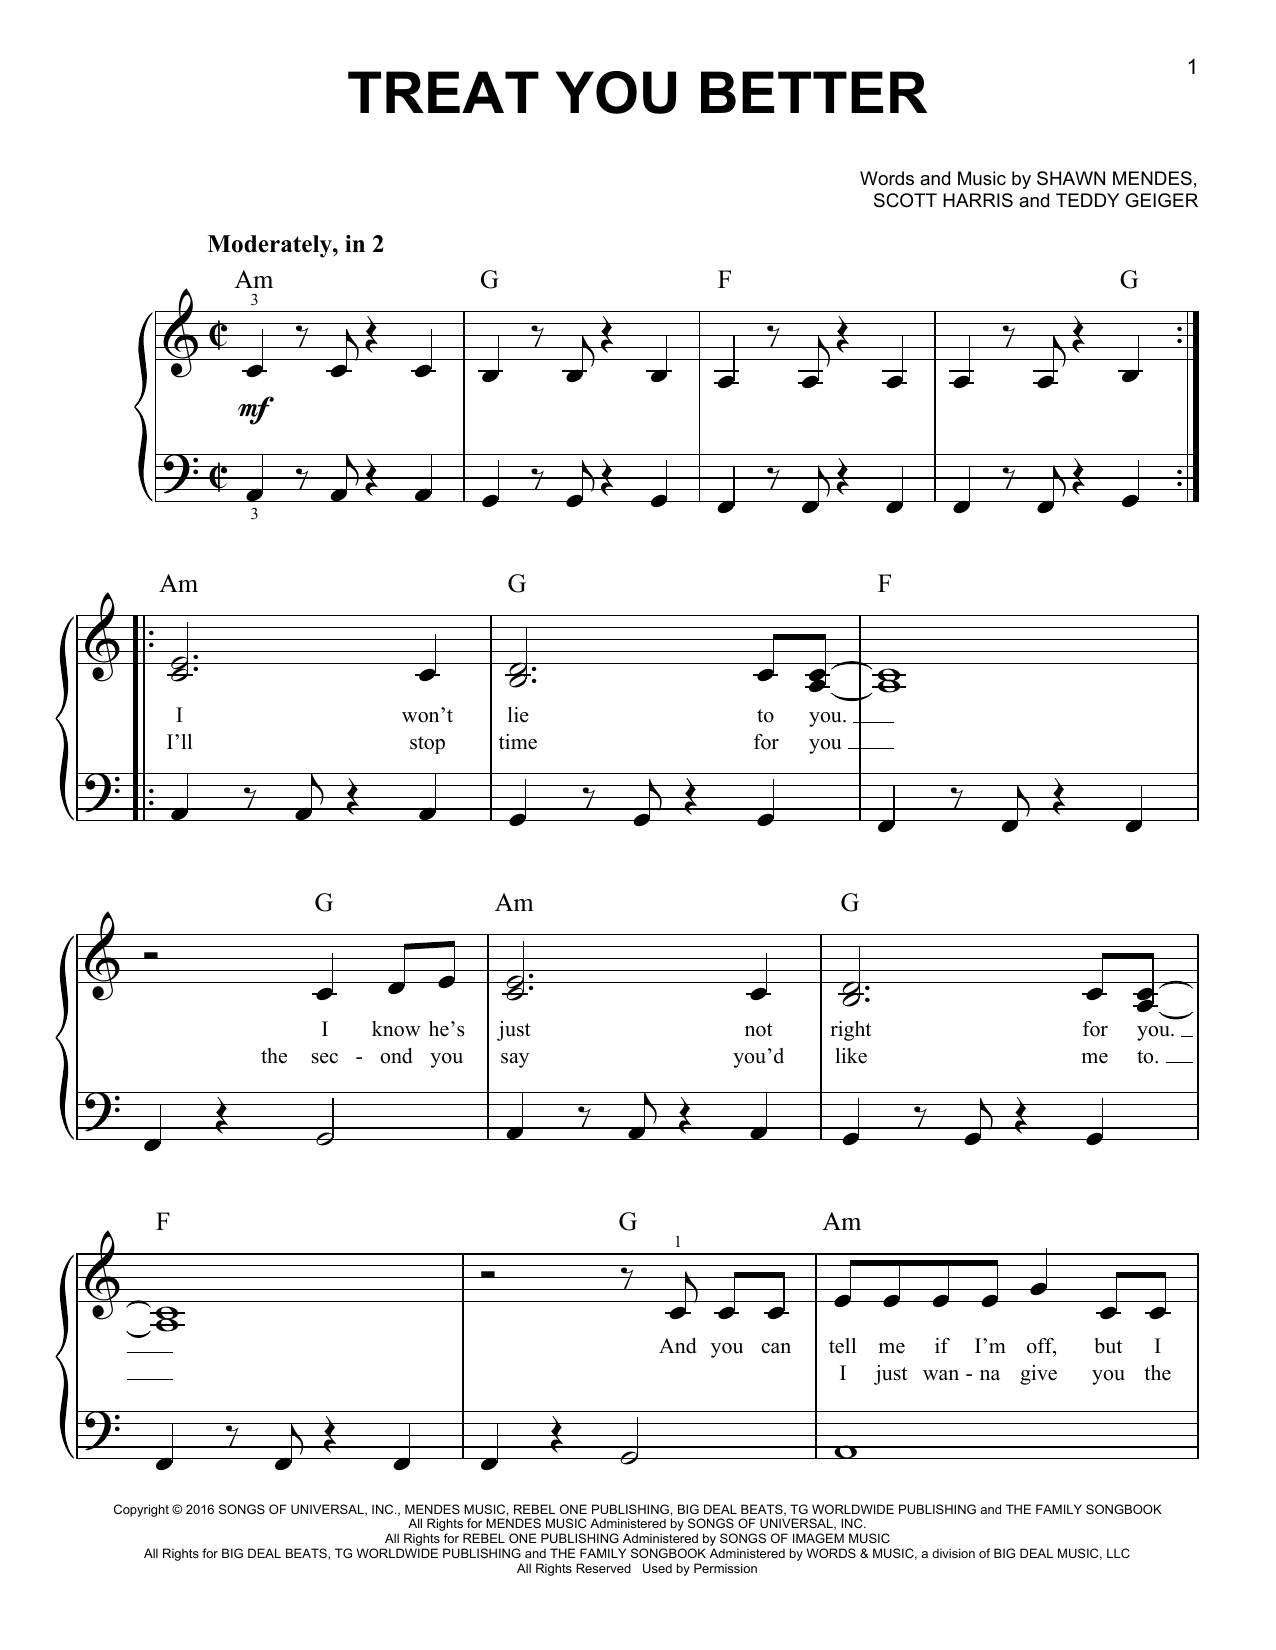 Download Shawn Mendes Treat You Better Sheet Music